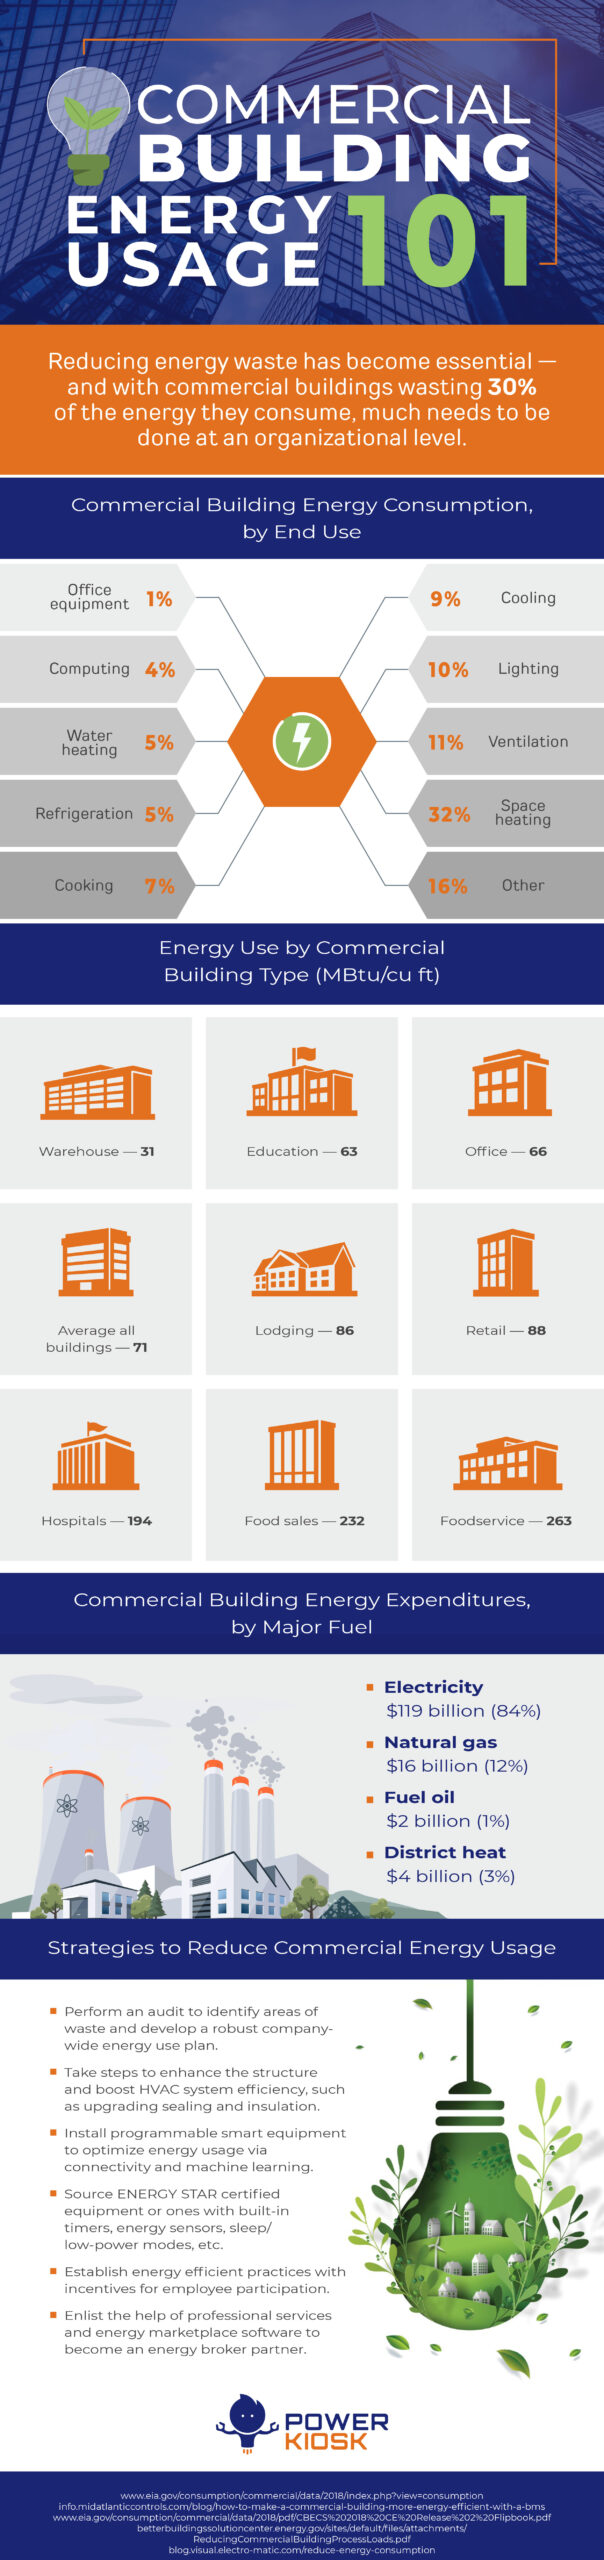 commercial building energy usage powerkiosk infographic